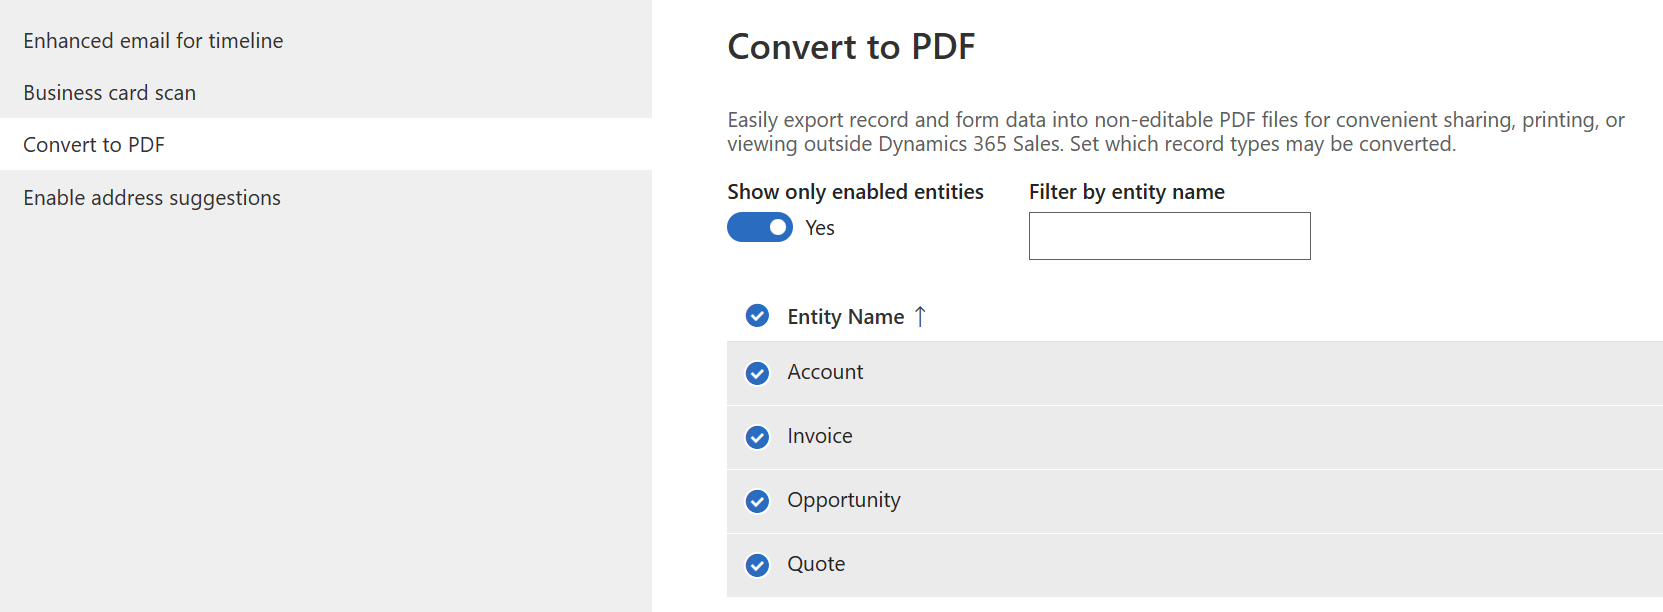 Screenshot of the Convert to PDF page